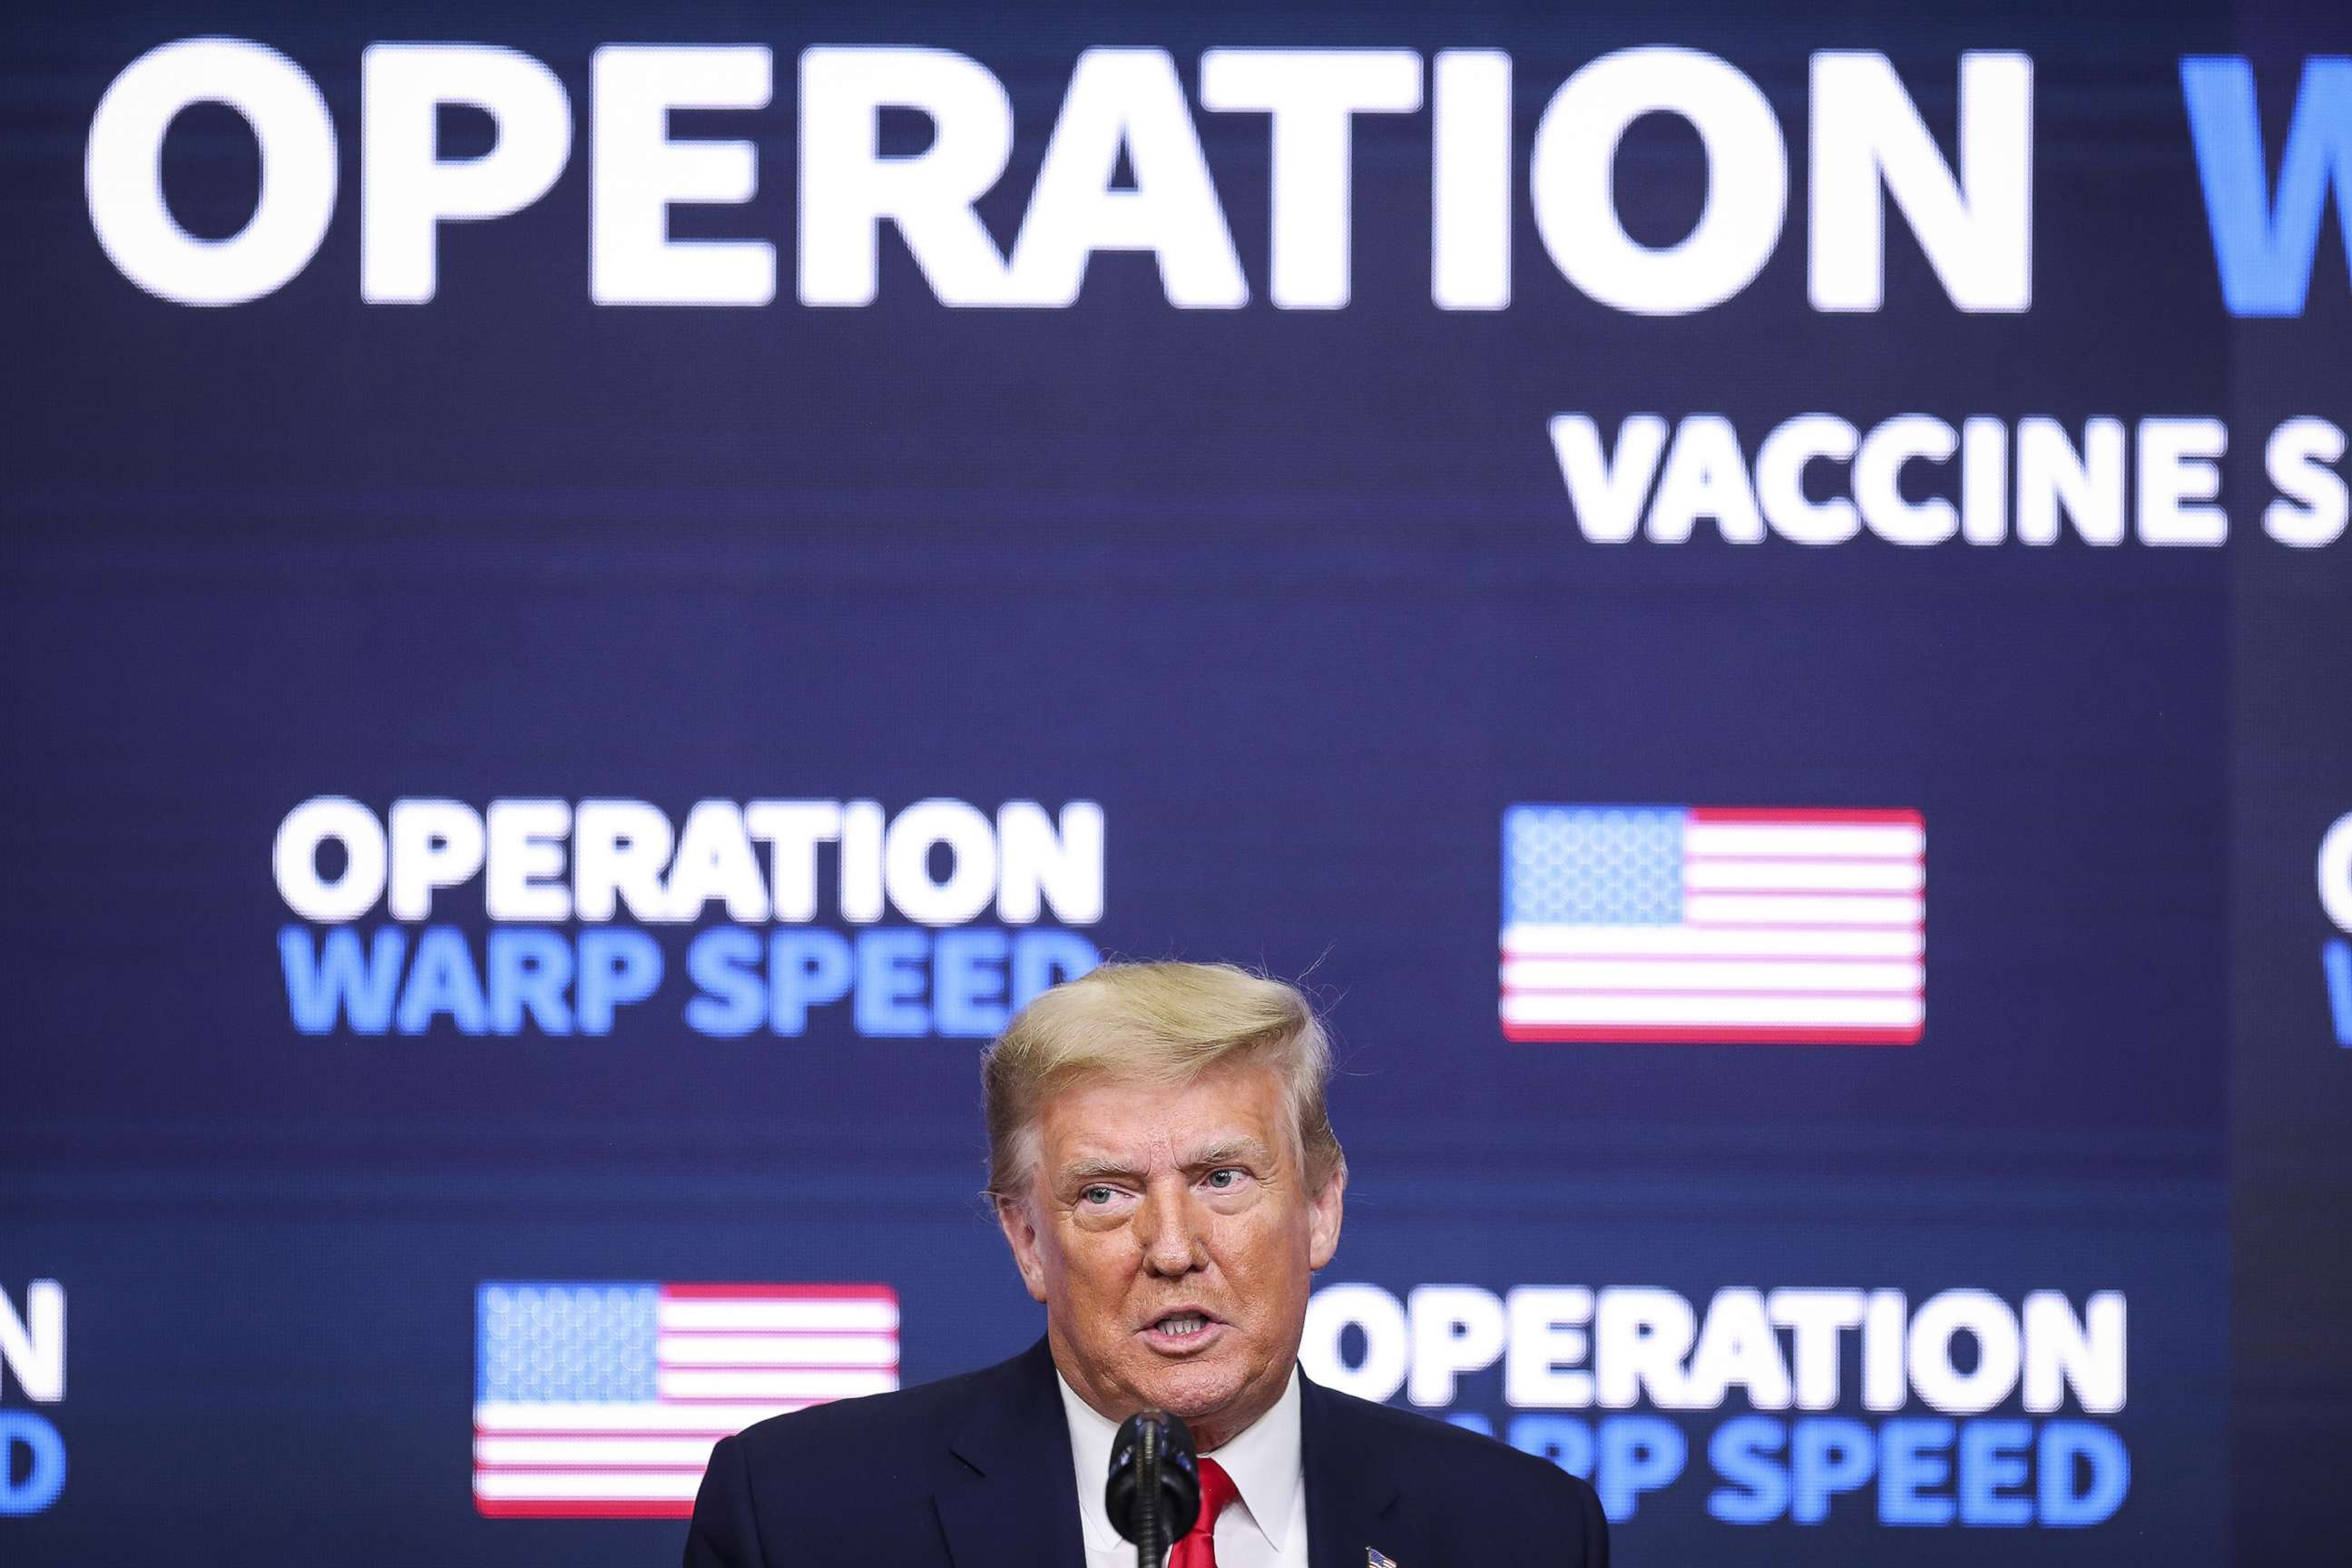 PHOTO: President Donald Trump speaks during an Operation Warp Speed vaccine summit at the White House in Washington on Dec. 8, 2020. Trump celebrated the development of coronavirus vaccines and vowed to use executive powers to acquire sufficient doses.